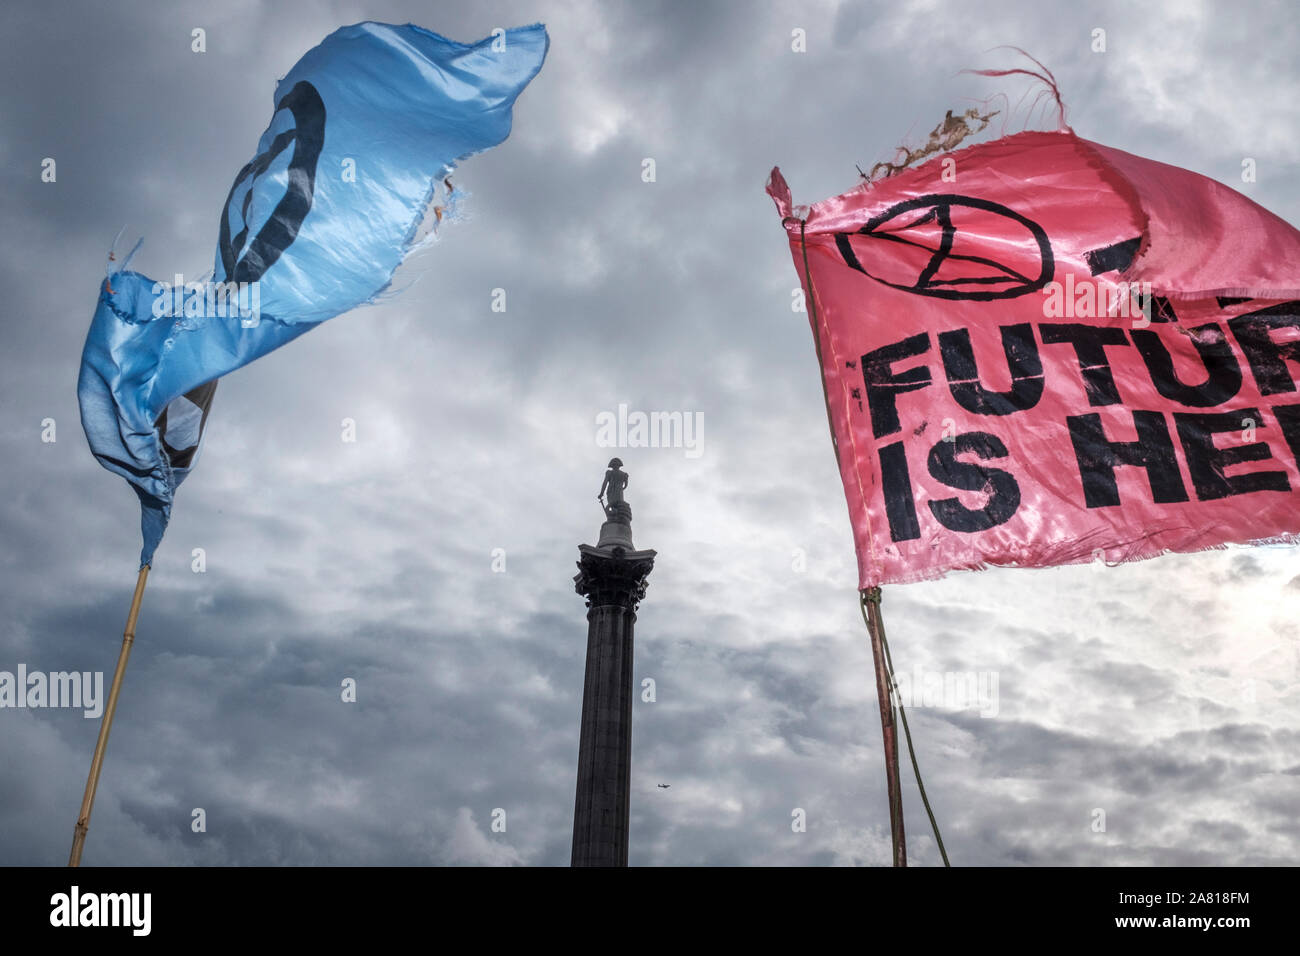 London,UK, October, 2019. Flags and banners of Extinction rebellion protesters on Trafalgar Square. Stock Photo